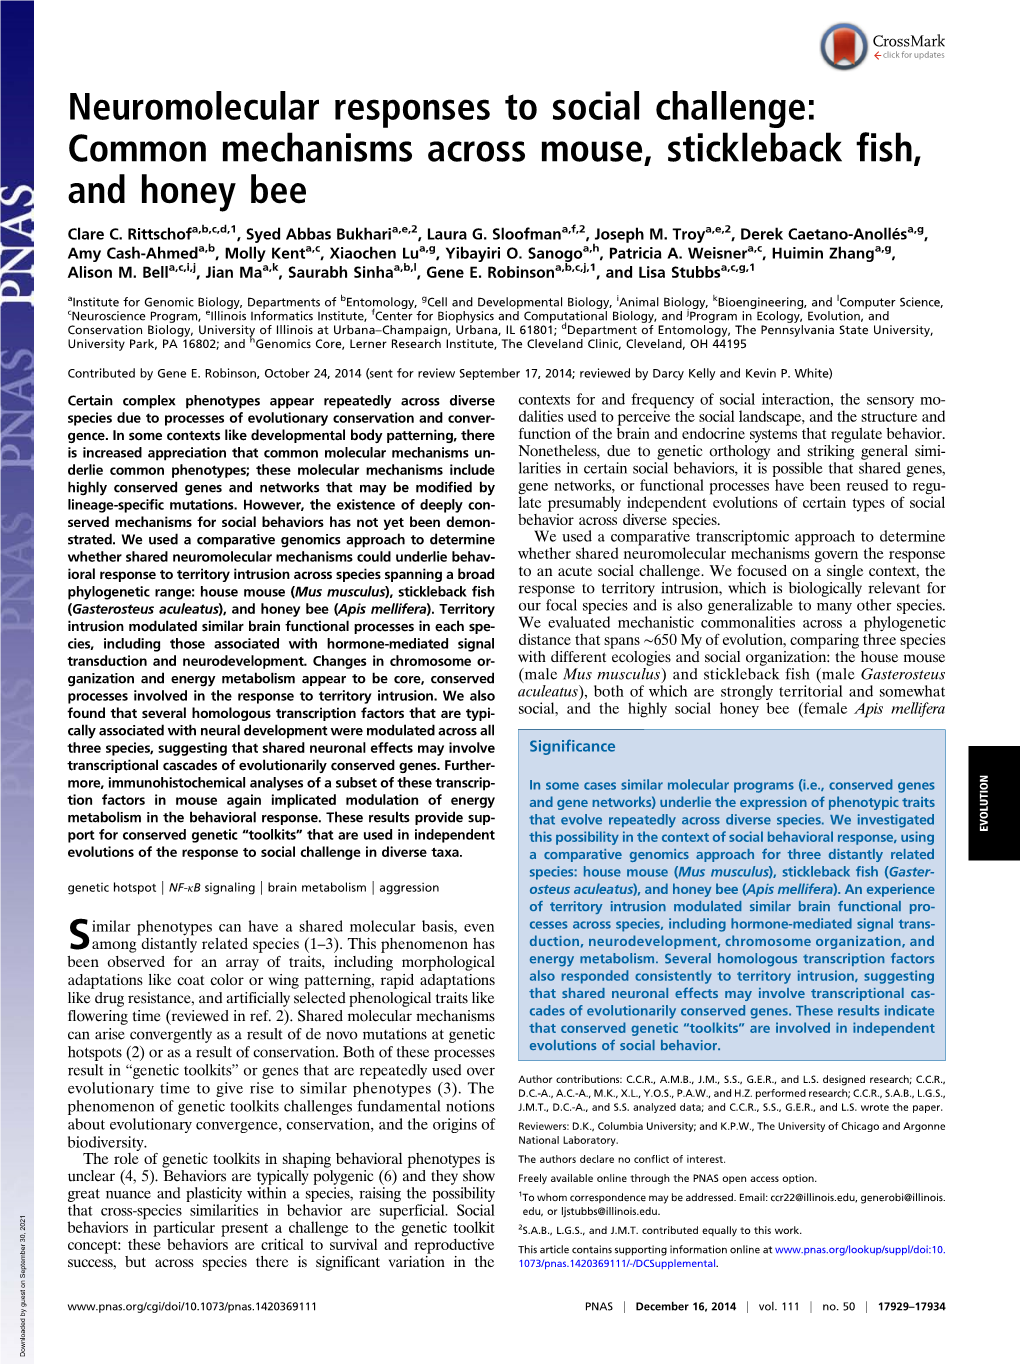 Common Mechanisms Across Mouse, Stickleback Fish, and Honey Bee